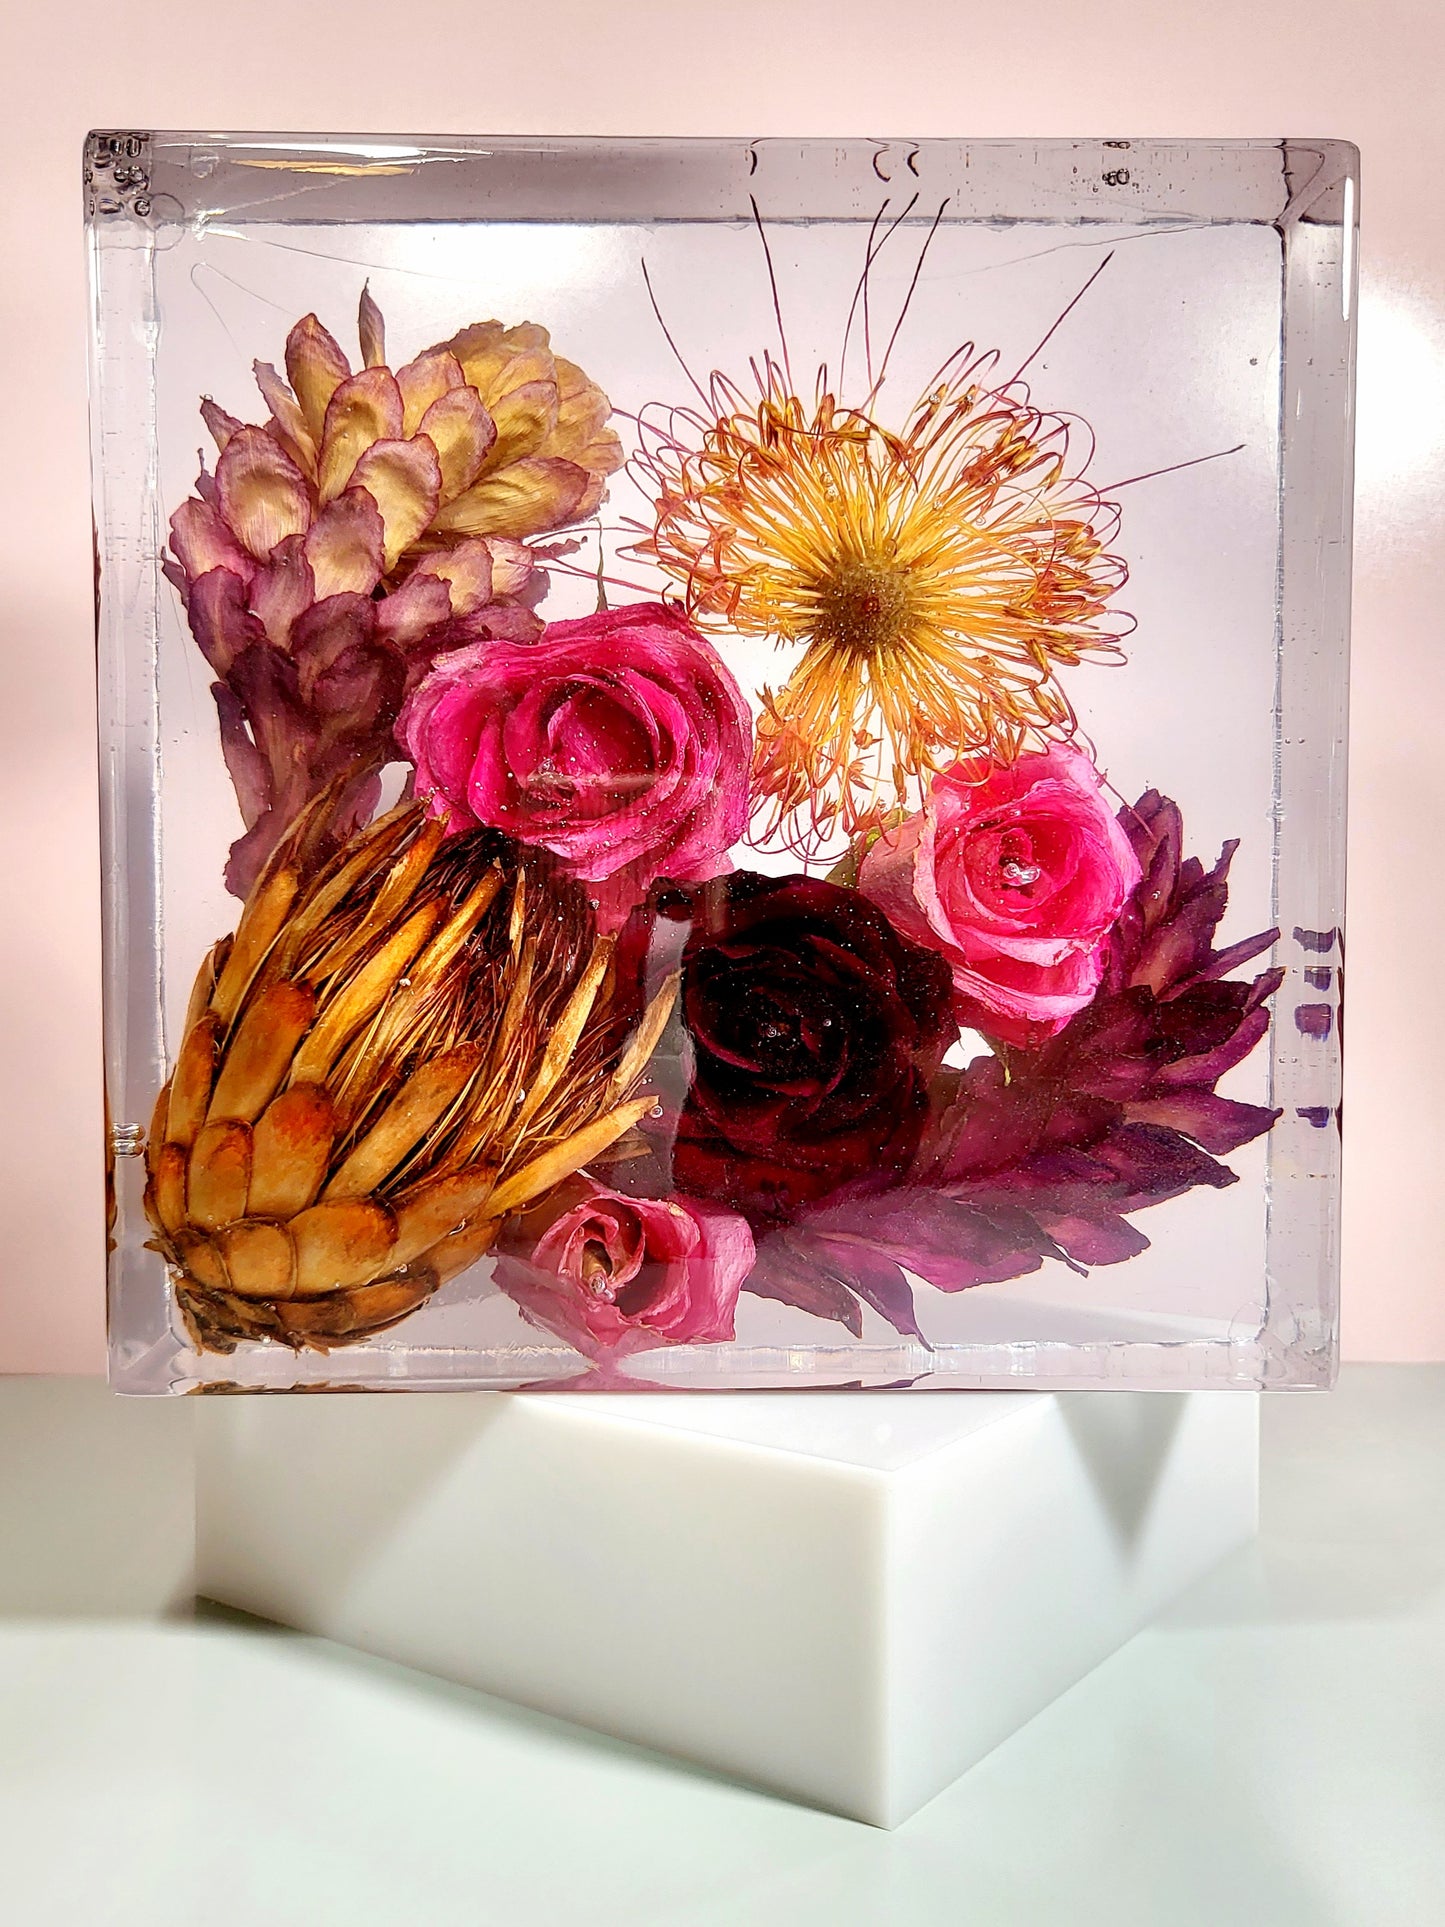 Square 8"x 8" 3D Floral Resin Wedding Bouquet Preservation Modern Fried Flowers Square Save Your Gift Keepsake - flofloflowery